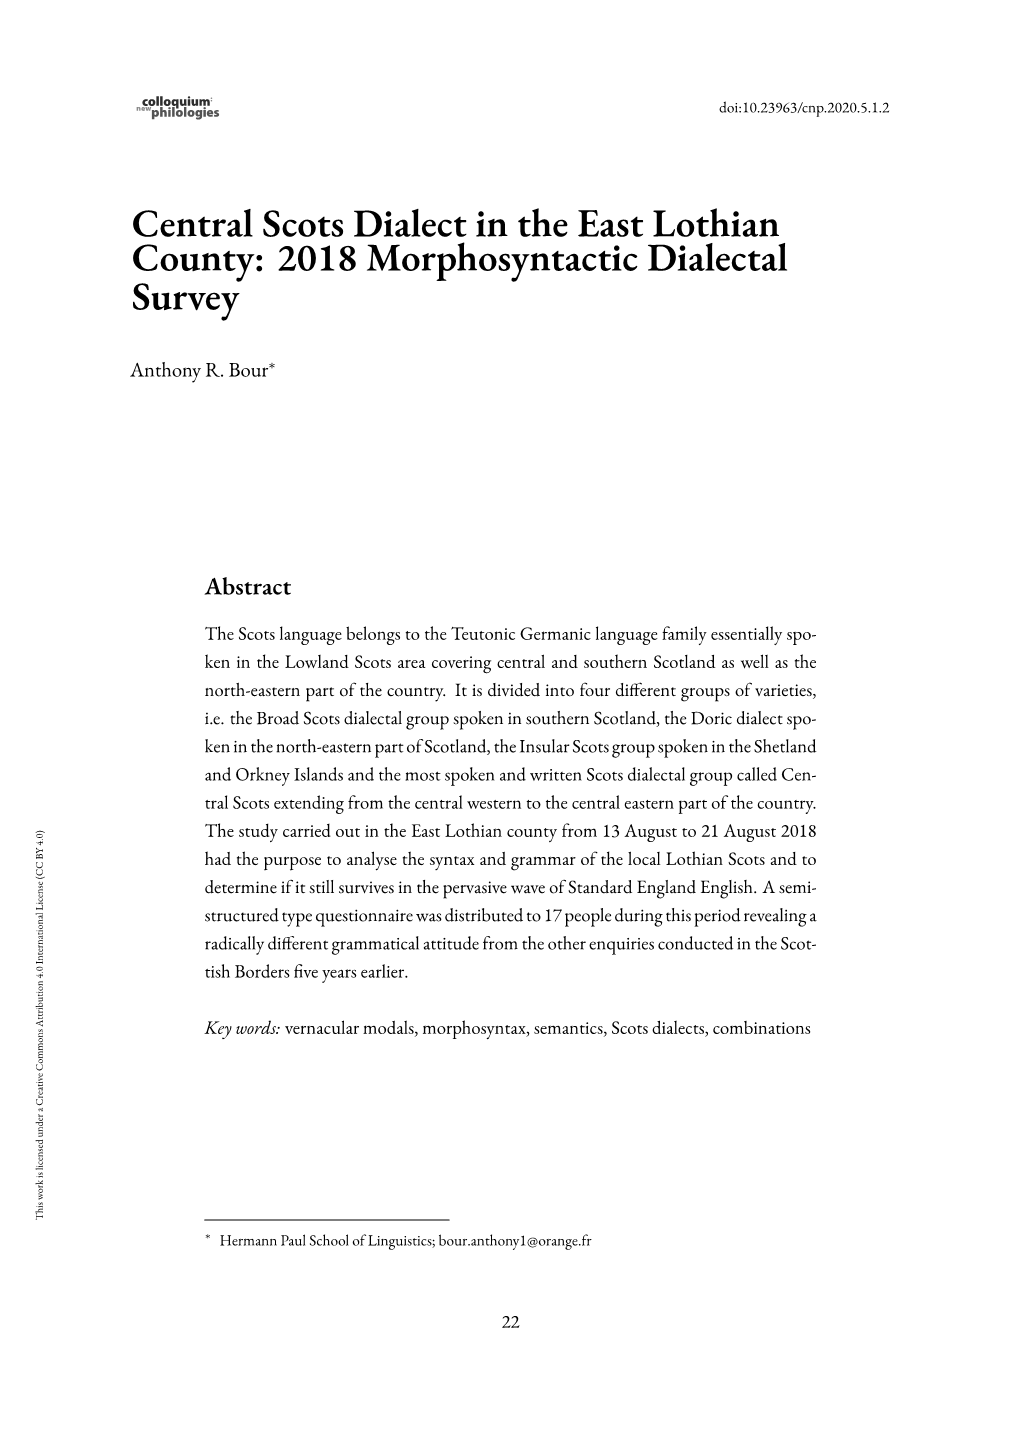 Central Scots Dialect in the East Lothian County: 2018 Morphosyntactic Dialectal Survey